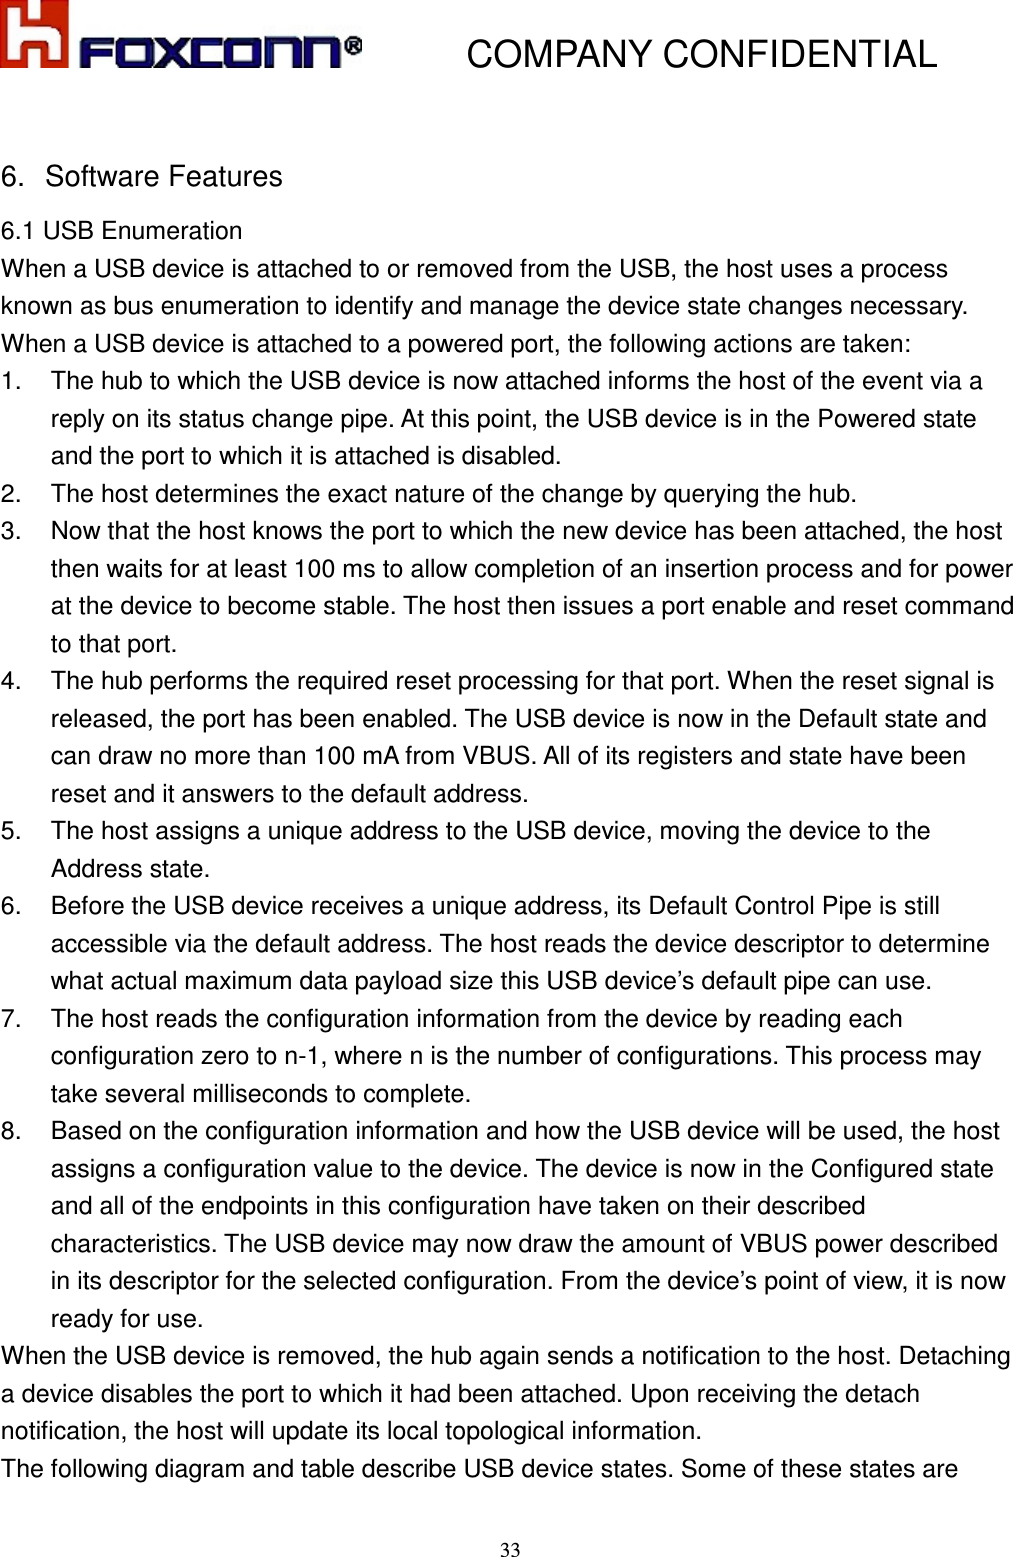           COMPANY CONFIDENTIAL    33 6.  Software Features 6.1 USB Enumeration When a USB device is attached to or removed from the USB, the host uses a process known as bus enumeration to identify and manage the device state changes necessary. When a USB device is attached to a powered port, the following actions are taken: 1.  The hub to which the USB device is now attached informs the host of the event via a reply on its status change pipe. At this point, the USB device is in the Powered state and the port to which it is attached is disabled. 2.  The host determines the exact nature of the change by querying the hub. 3.  Now that the host knows the port to which the new device has been attached, the host then waits for at least 100 ms to allow completion of an insertion process and for power at the device to become stable. The host then issues a port enable and reset command to that port.   4.  The hub performs the required reset processing for that port. When the reset signal is released, the port has been enabled. The USB device is now in the Default state and can draw no more than 100 mA from VBUS. All of its registers and state have been reset and it answers to the default address. 5.  The host assigns a unique address to the USB device, moving the device to the Address state. 6.  Before the USB device receives a unique address, its Default Control Pipe is still accessible via the default address. The host reads the device descriptor to determine what actual maximum data payload size this USB device’s default pipe can use. 7.  The host reads the configuration information from the device by reading each configuration zero to n-1, where n is the number of configurations. This process may take several milliseconds to complete. 8.  Based on the configuration information and how the USB device will be used, the host assigns a configuration value to the device. The device is now in the Configured state and all of the endpoints in this configuration have taken on their described characteristics. The USB device may now draw the amount of VBUS power described in its descriptor for the selected configuration. From the device’s point of view, it is now ready for use. When the USB device is removed, the hub again sends a notification to the host. Detaching a device disables the port to which it had been attached. Upon receiving the detach notification, the host will update its local topological information. The following diagram and table describe USB device states. Some of these states are 